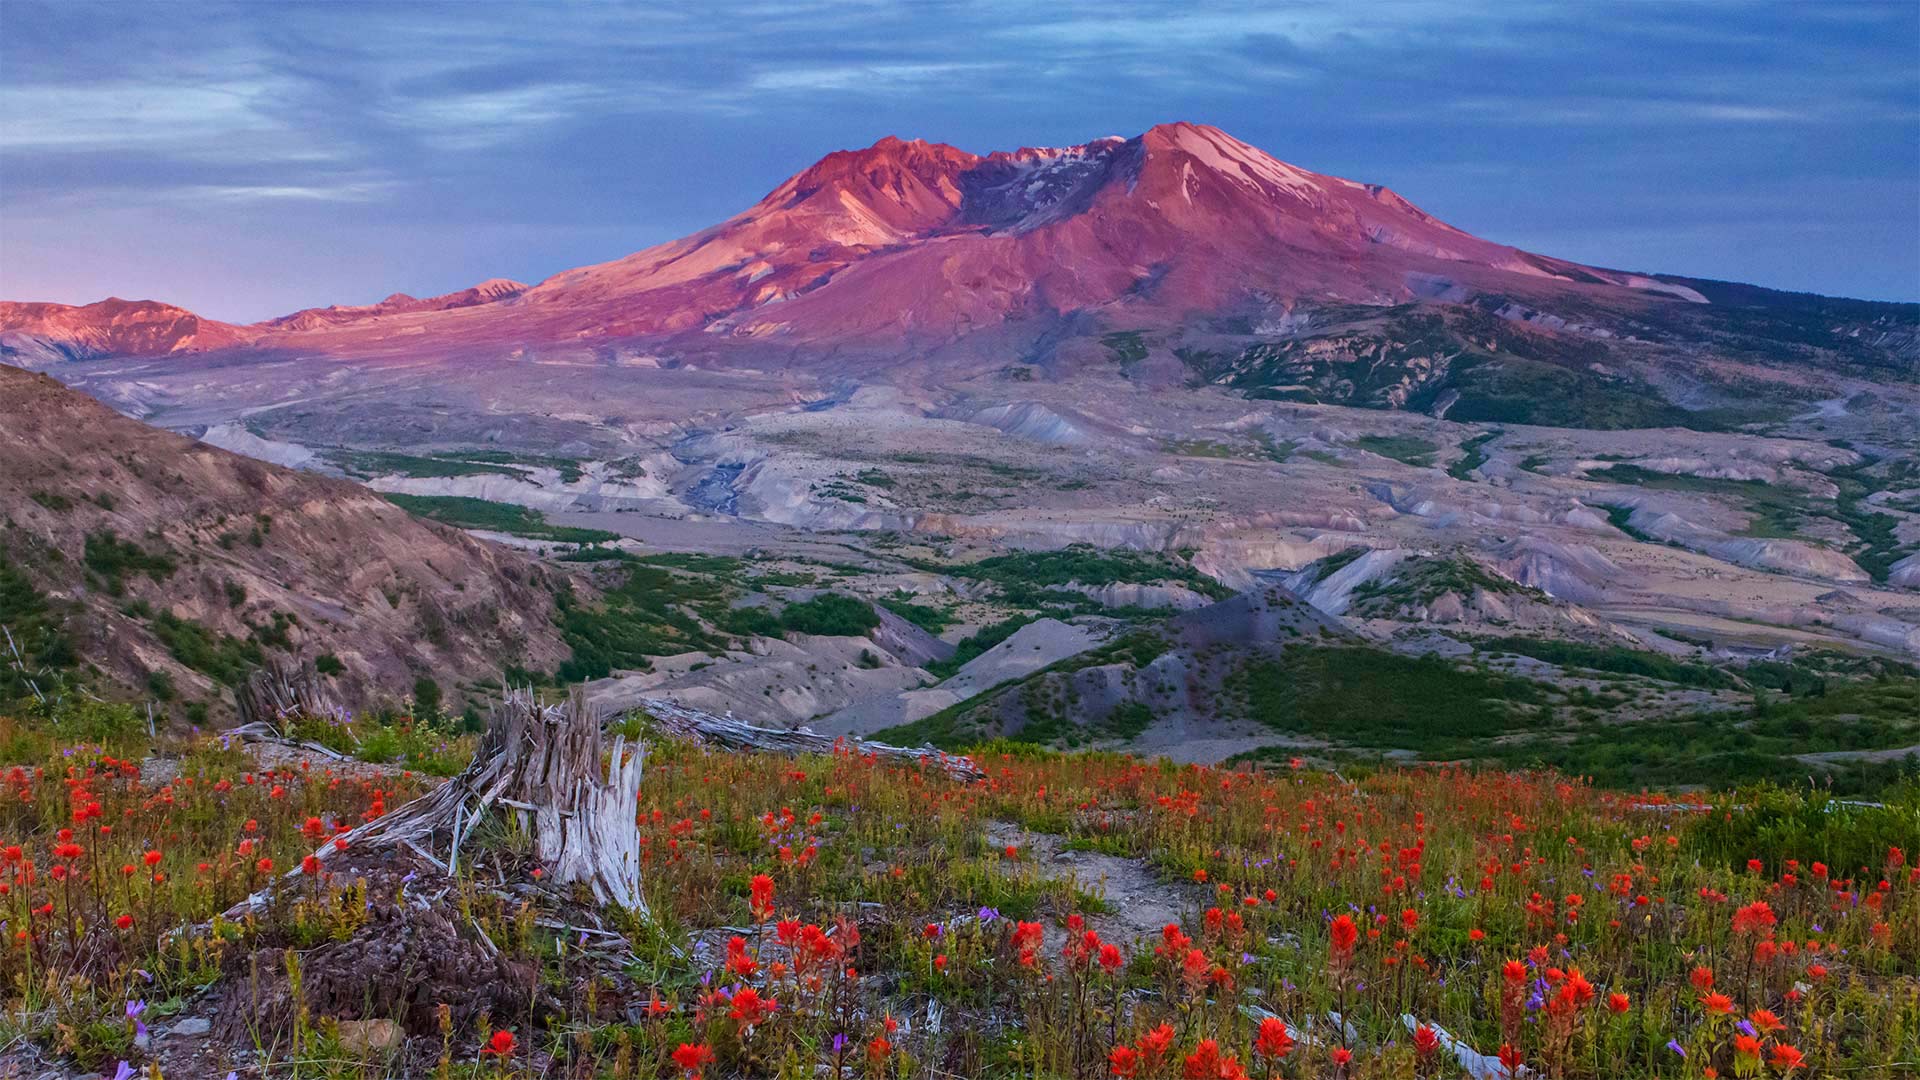 Boundary Trail in Mount St. Helens National Volcanic Monument, Washington - Don Geyer/Alamy)